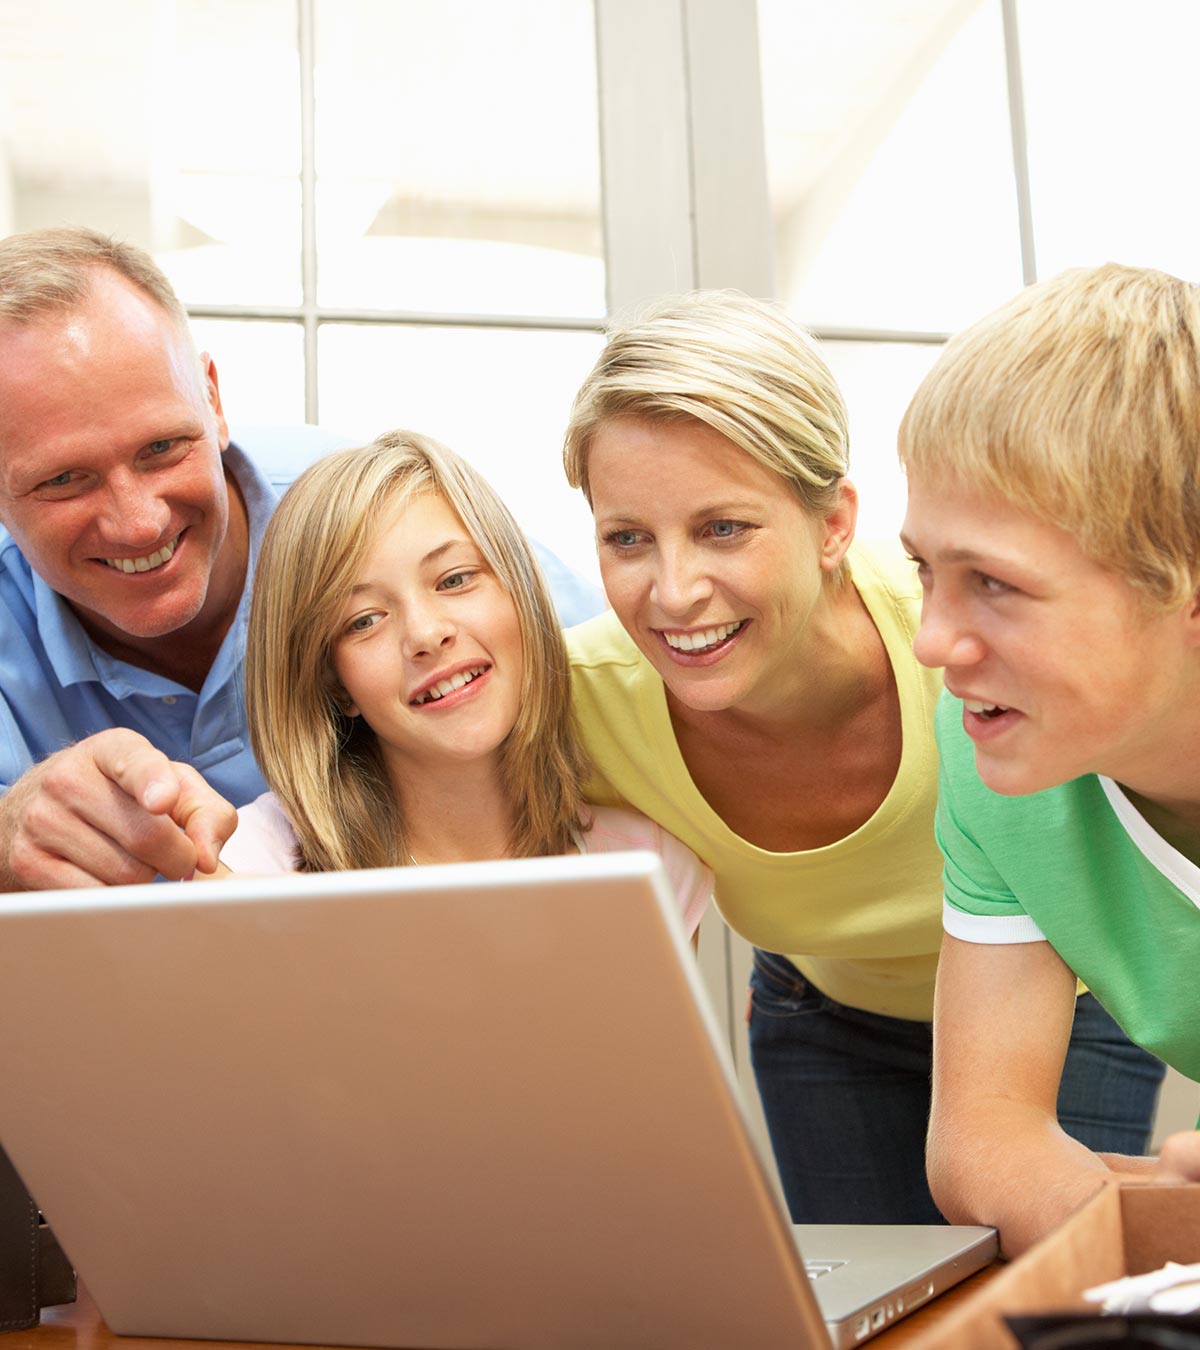 A boy and a girl watching laptop with their parents